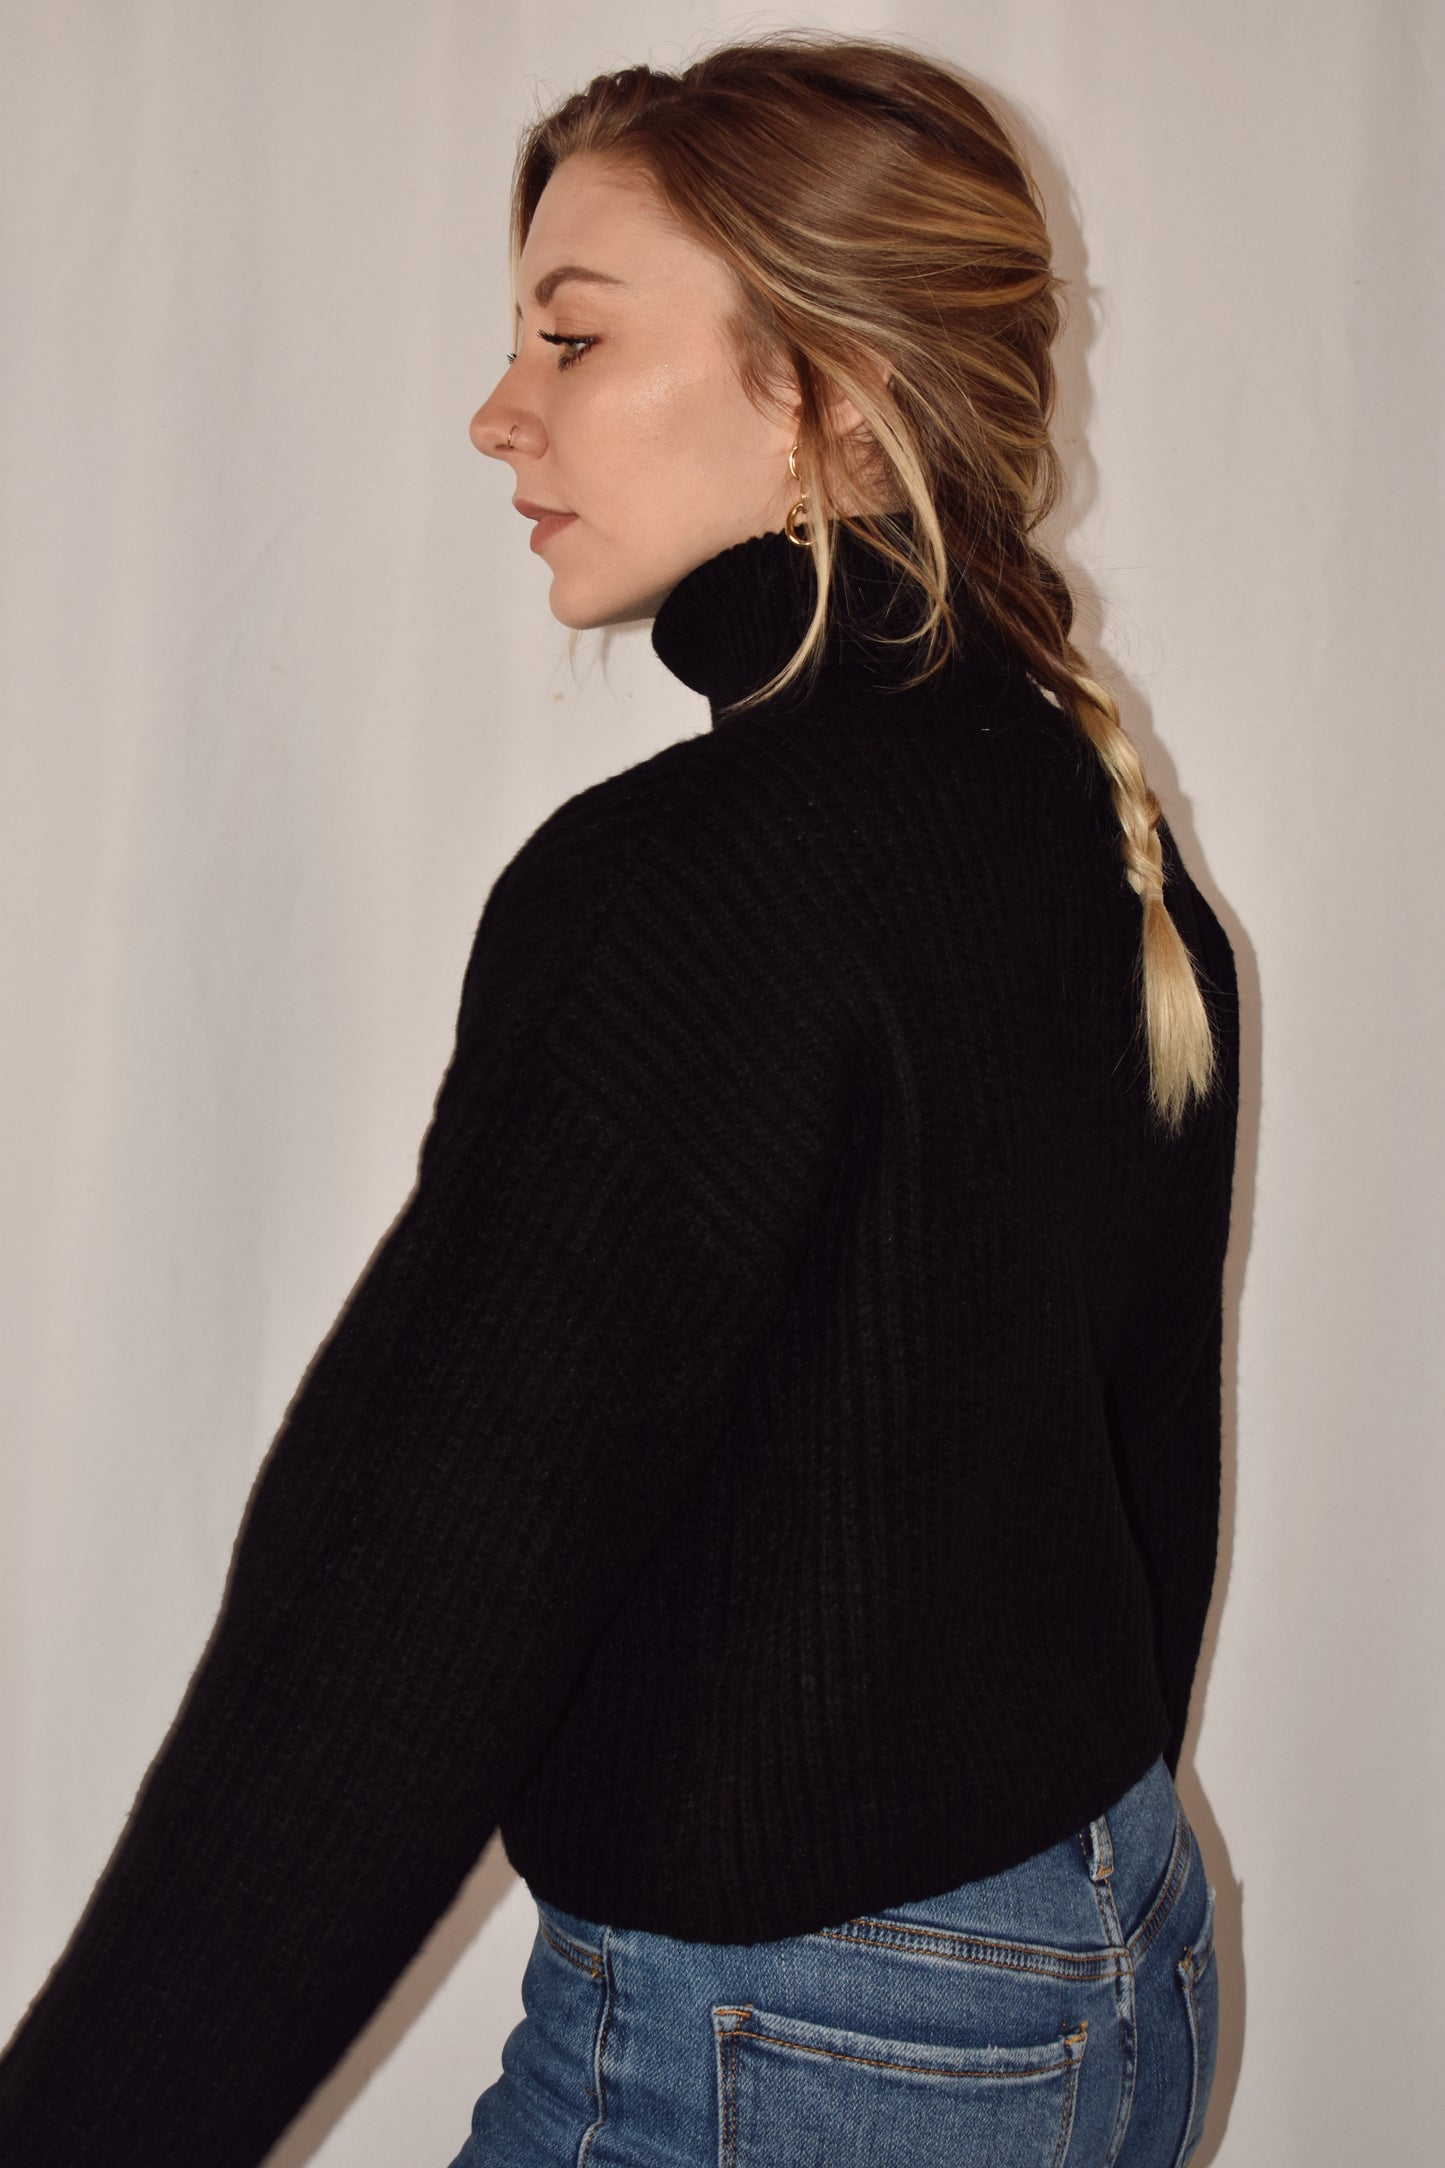 thick turtleneck semi cropped sweater with loose fit and drop shoulder design. loose fitting sleeves.